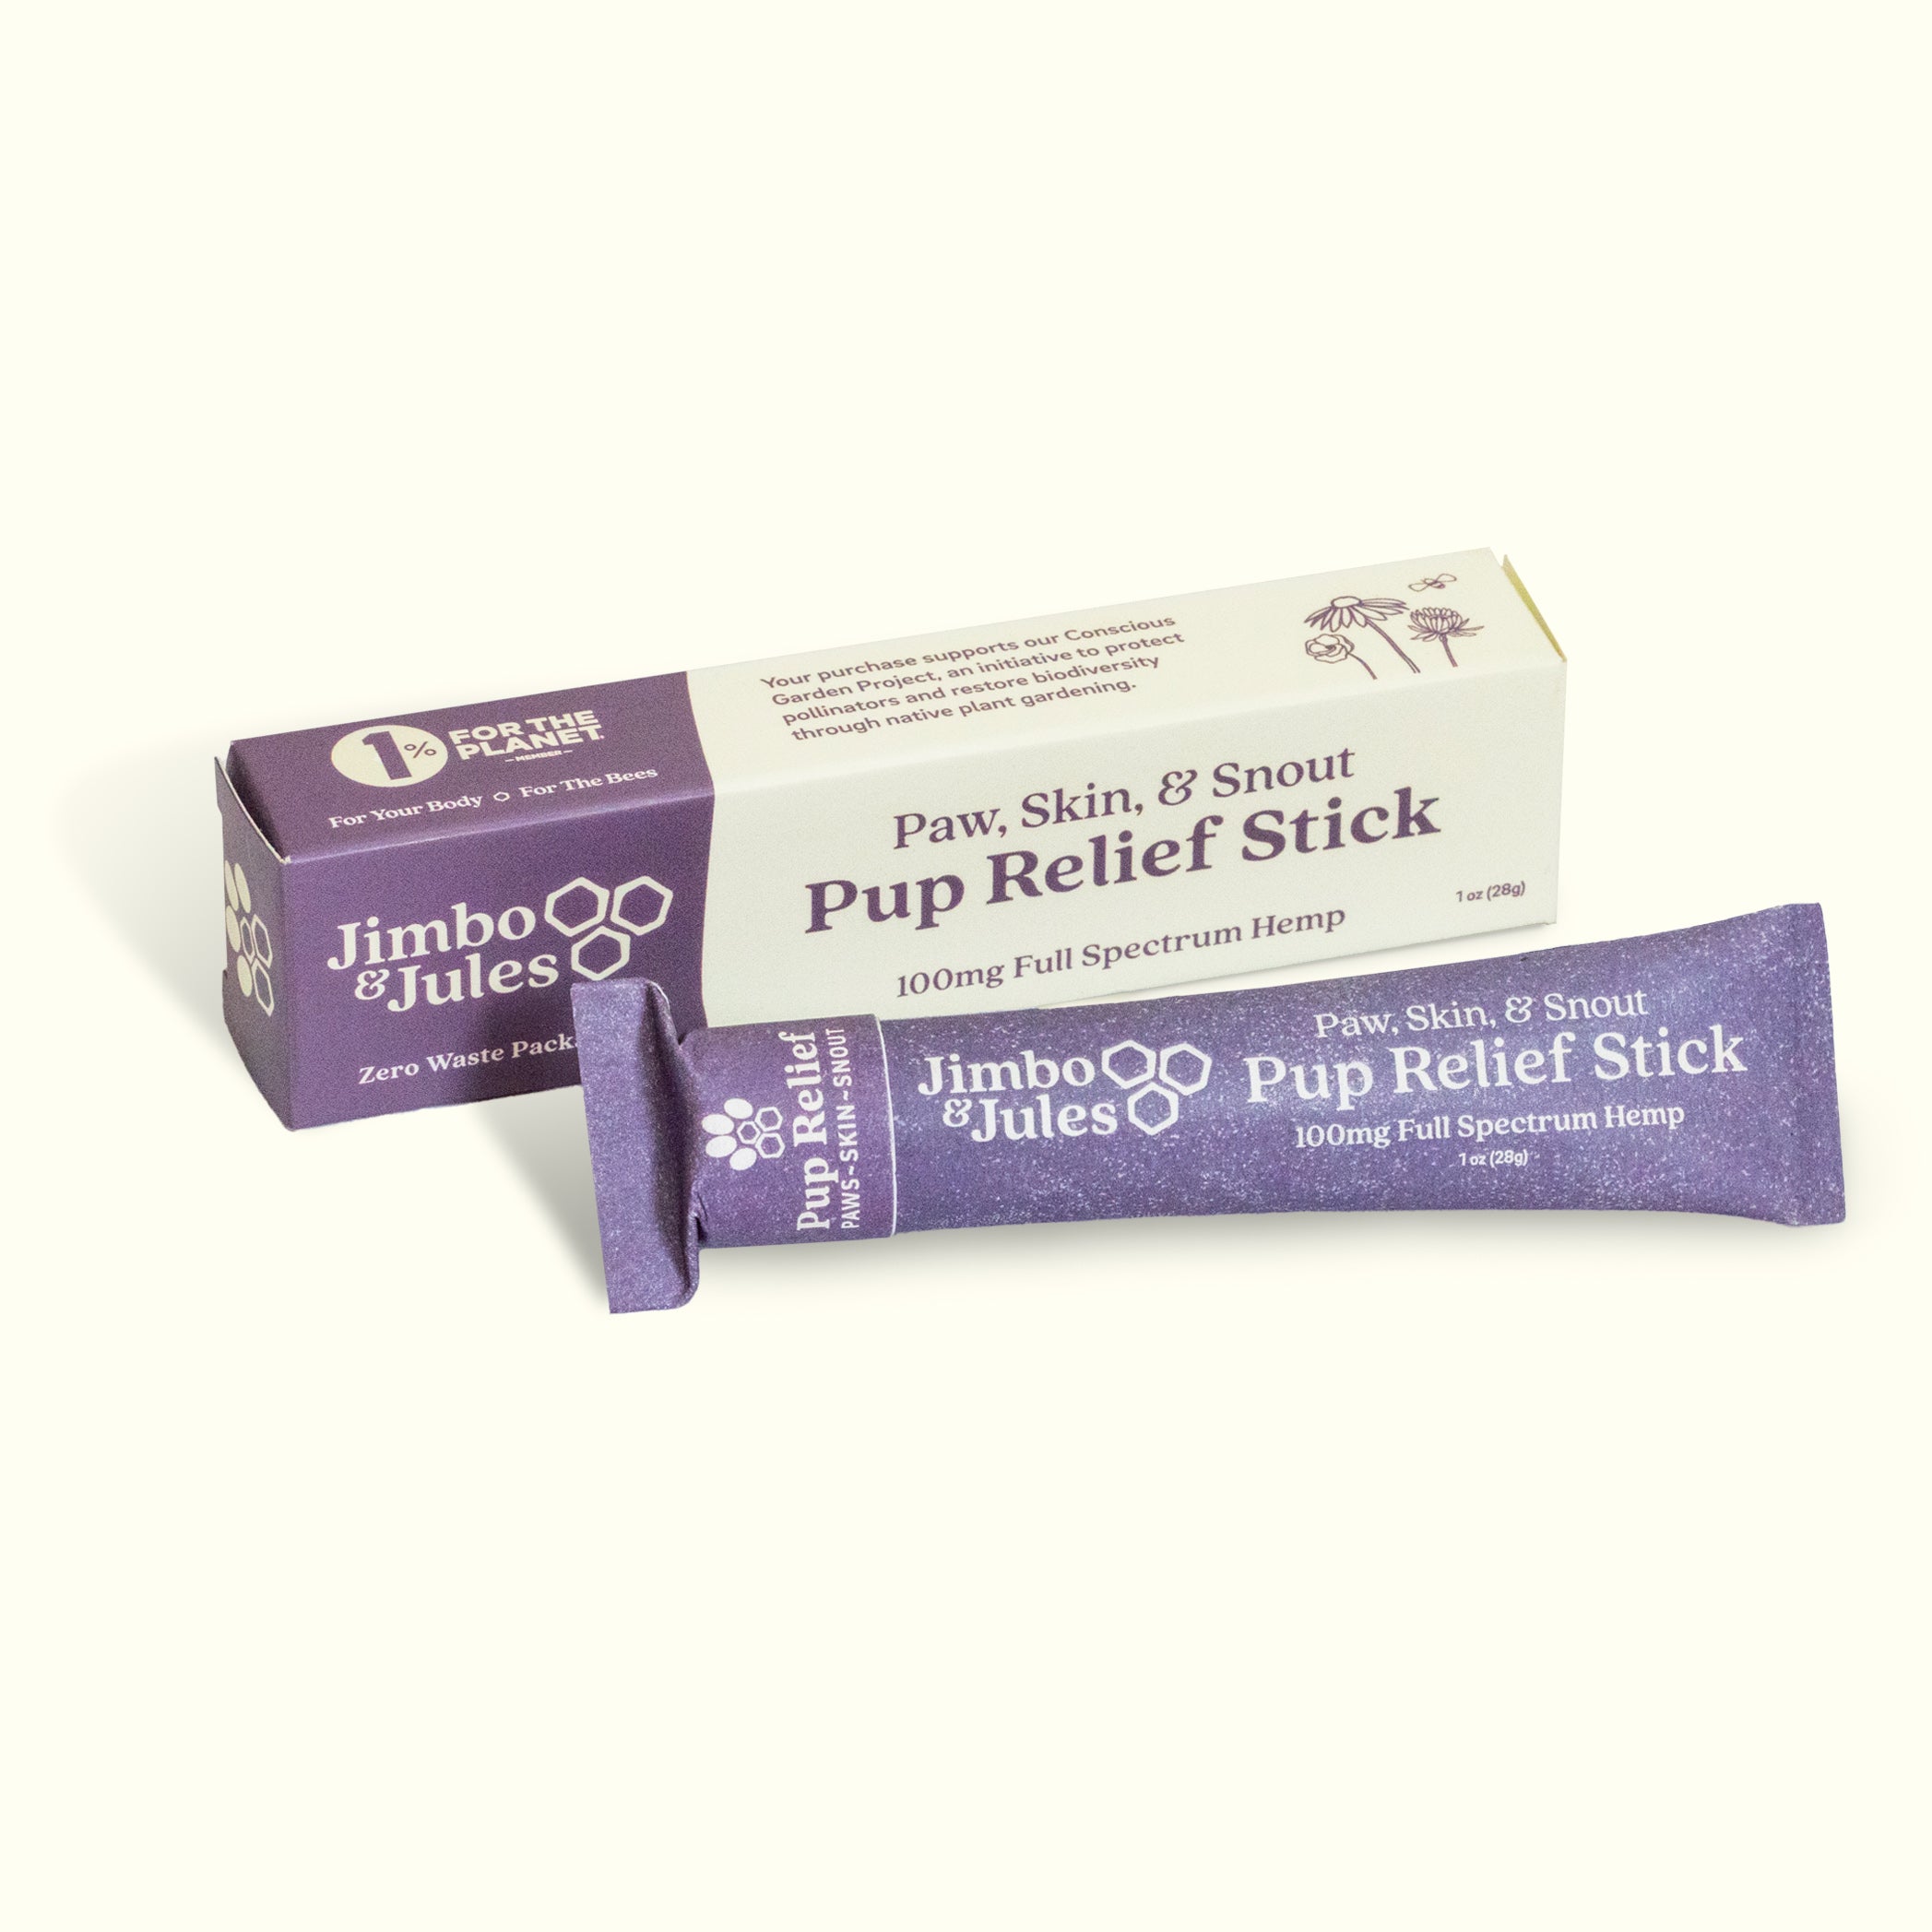 Pup Relief Stick